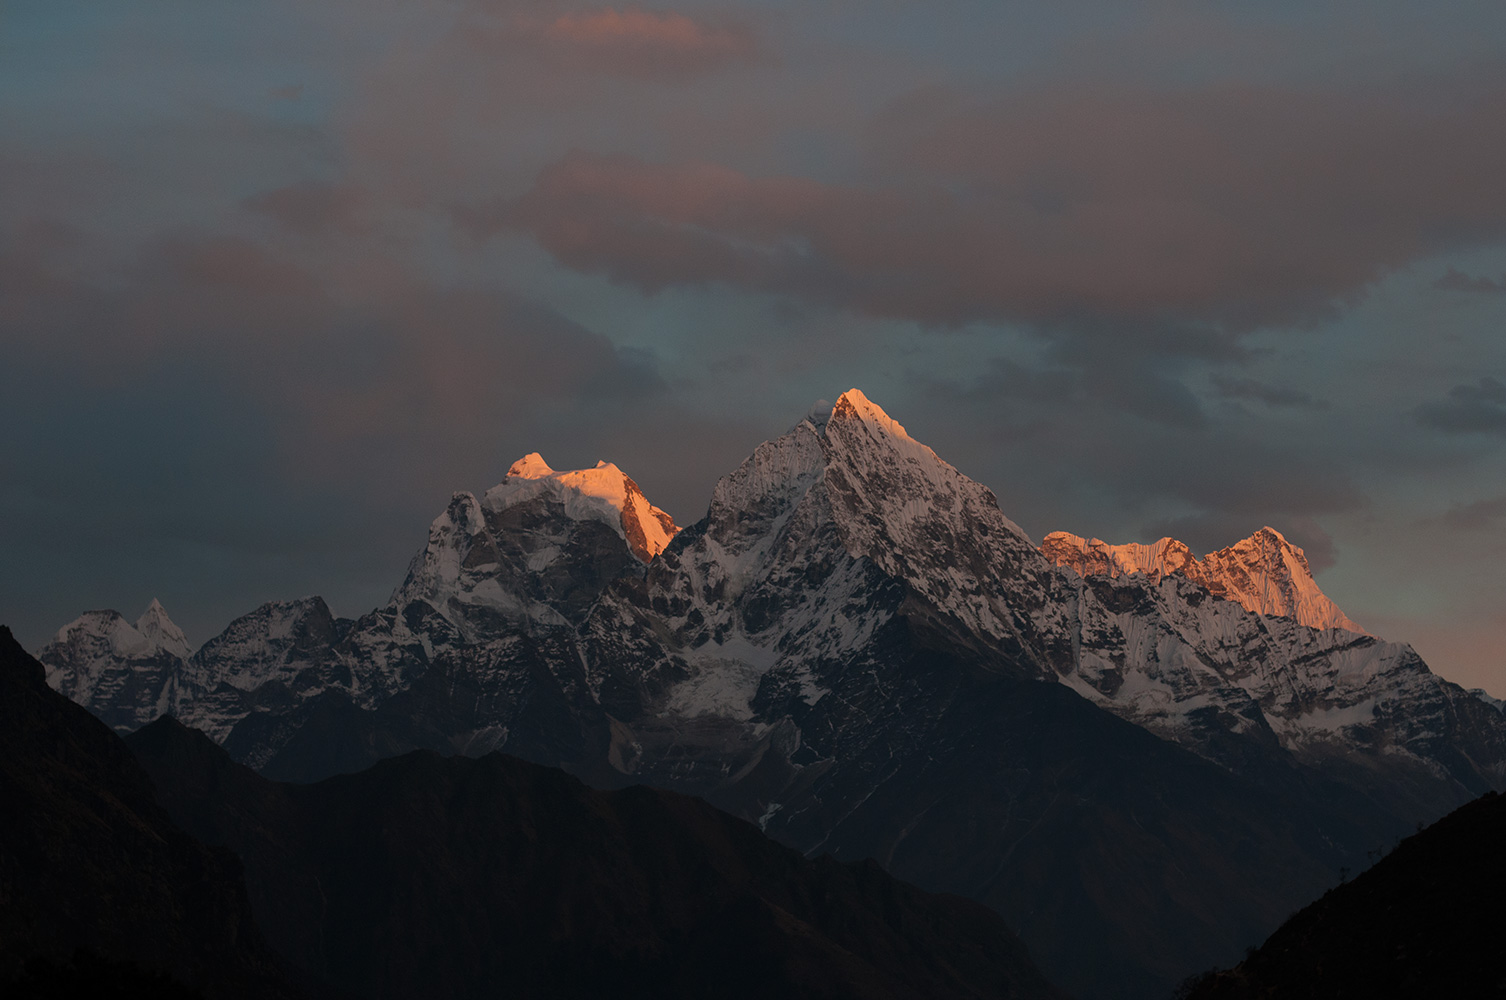 From Thame Village in the Khumbu. On the far left is Melanphulan (6573m) in shadow, with Kantega, Thamserku and Kyashar catching the last rays of the sun.Nikon D300, 50mm. December 2008